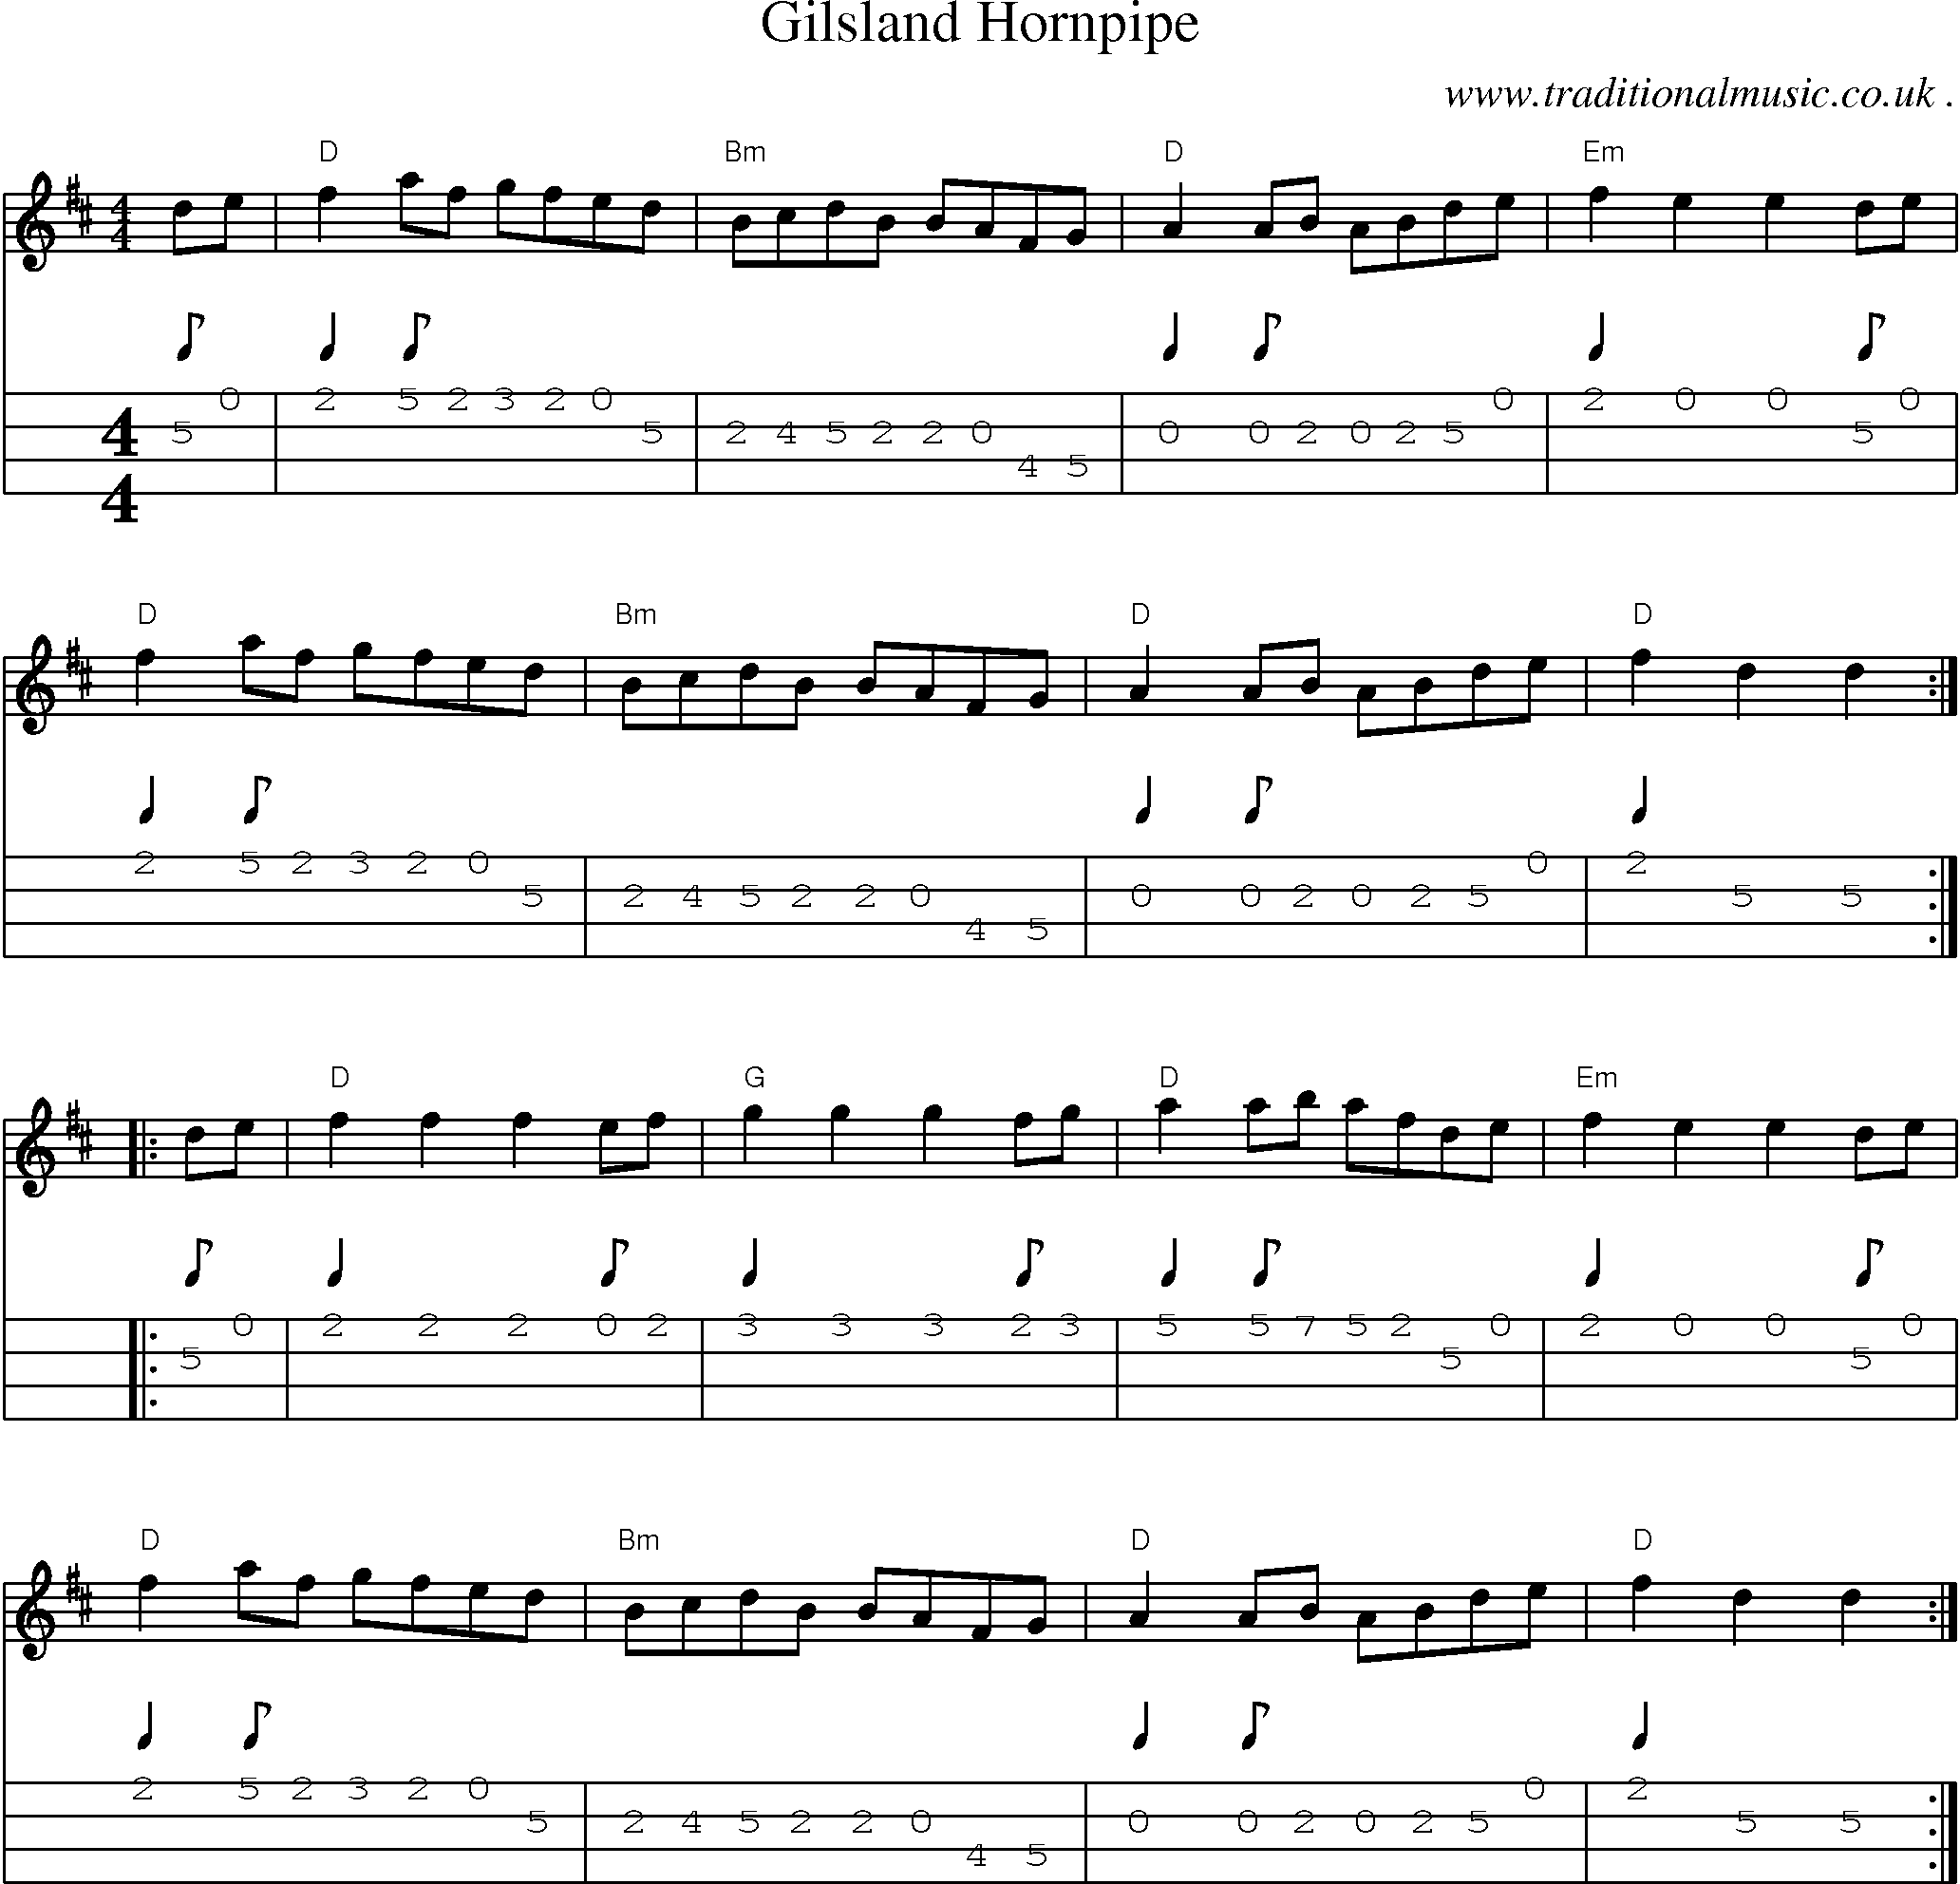 Music Score and Guitar Tabs for Gilsland Hornpipe